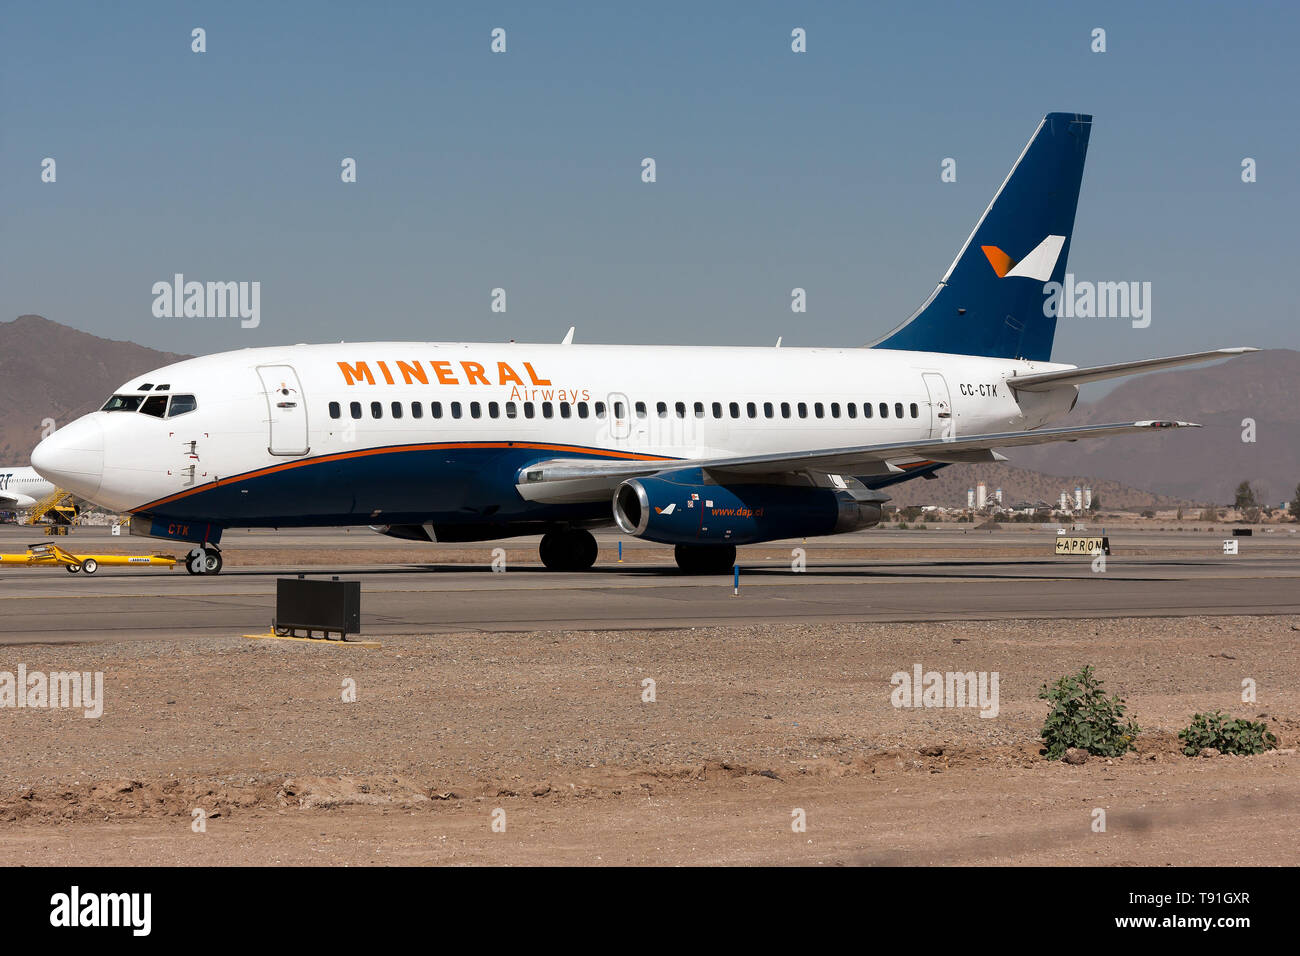 Santiago, Chile. 19th Mar, 2019. An old Mineral Airways Boeing 737-200 seen being towed at Santiago airport. Credit: Fabrizio Gandolfo/SOPA Images/ZUMA Wire/Alamy Live News Stock Photo